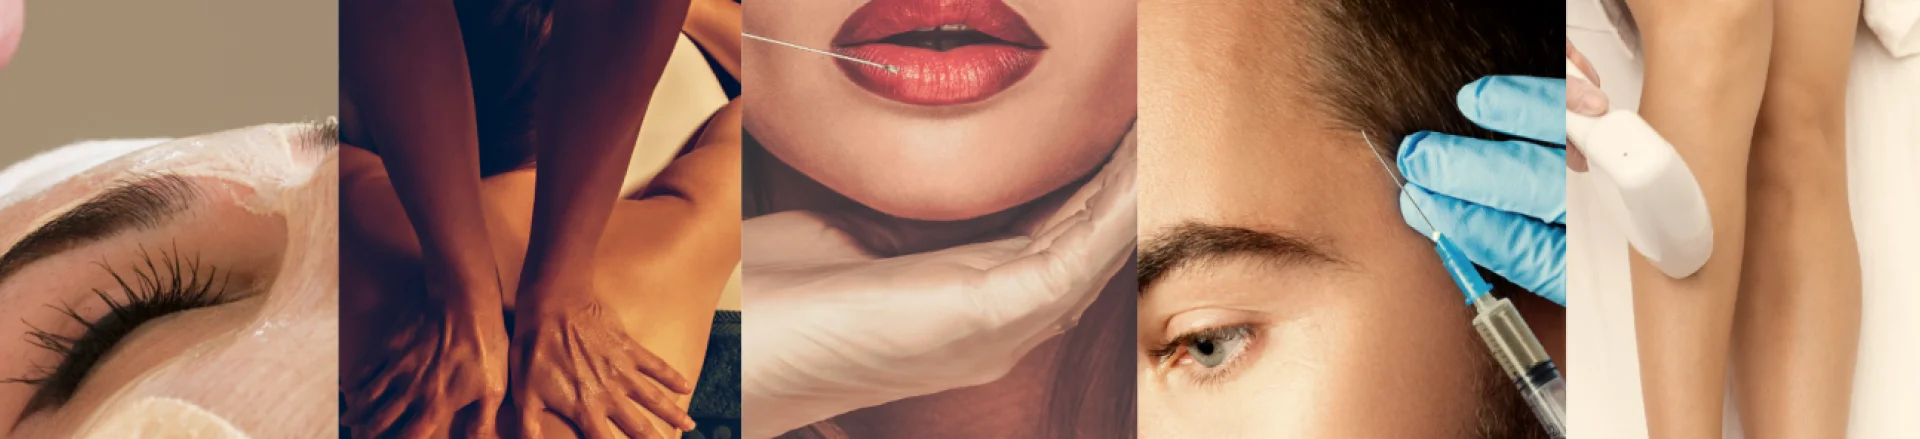 Anti Aging Injectables